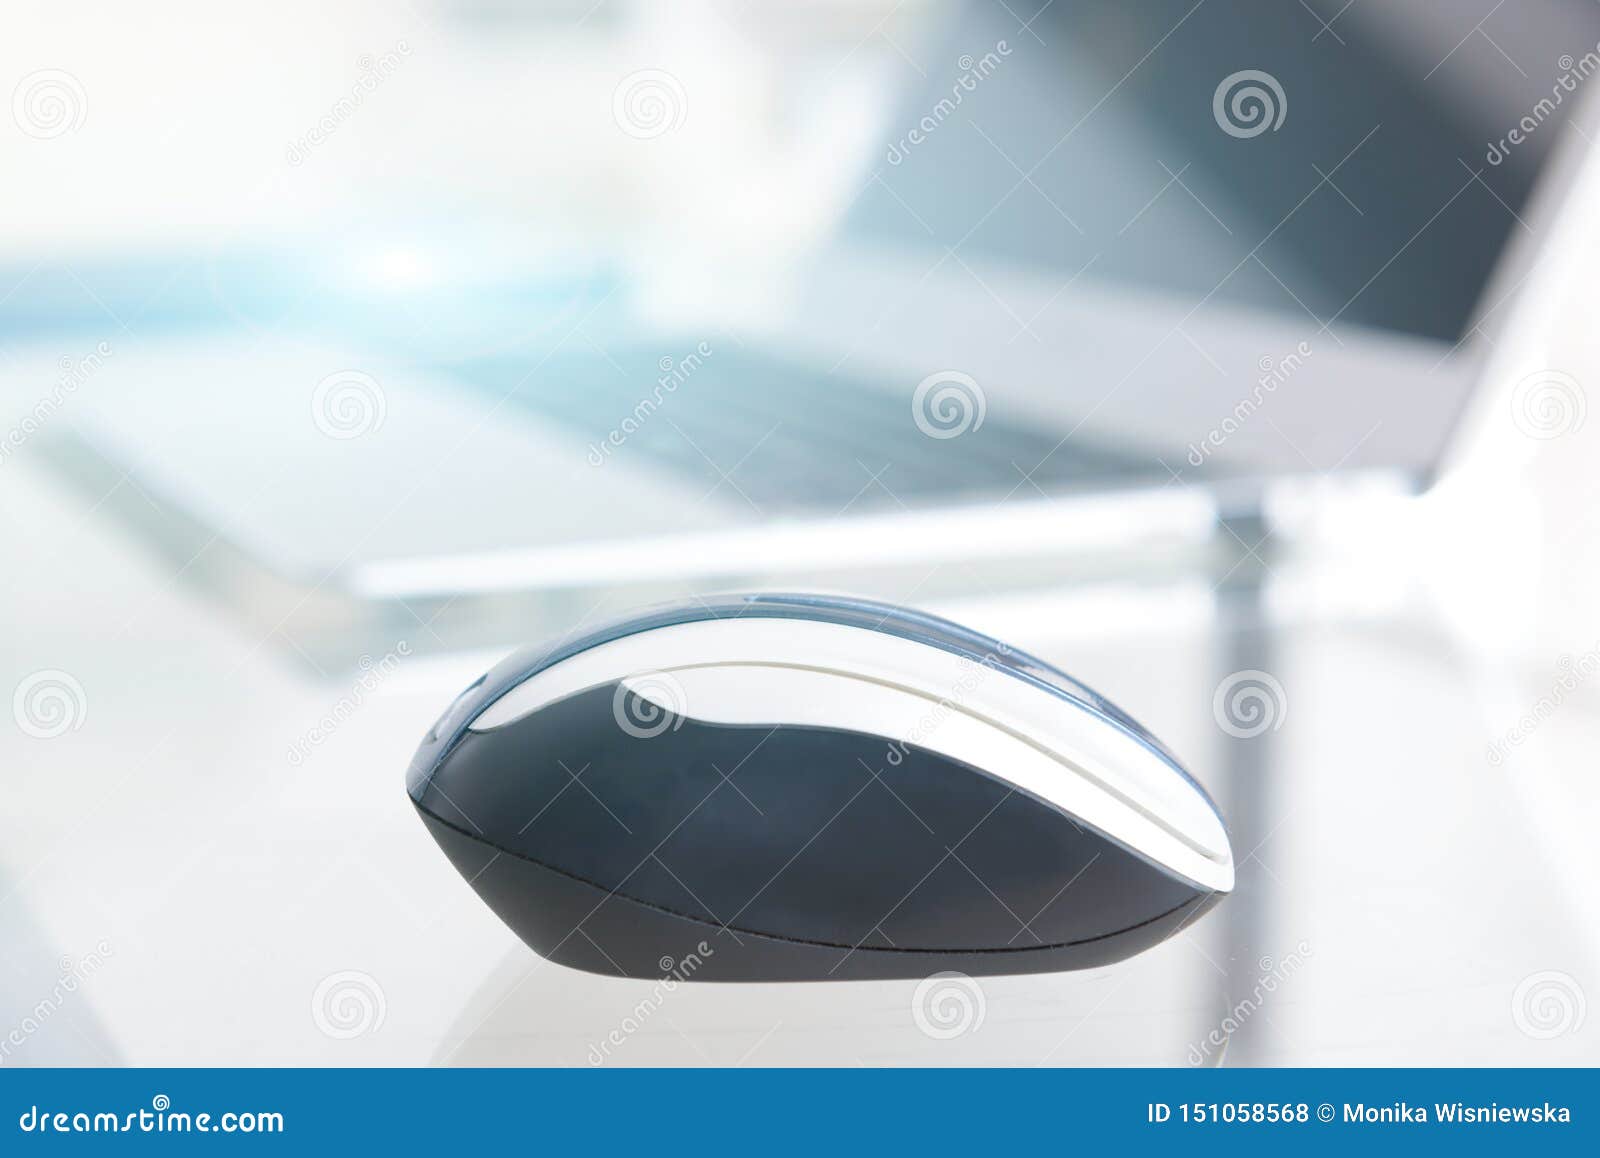 Computer Wireless Mouse On Glass Stock Photo Image Of Object